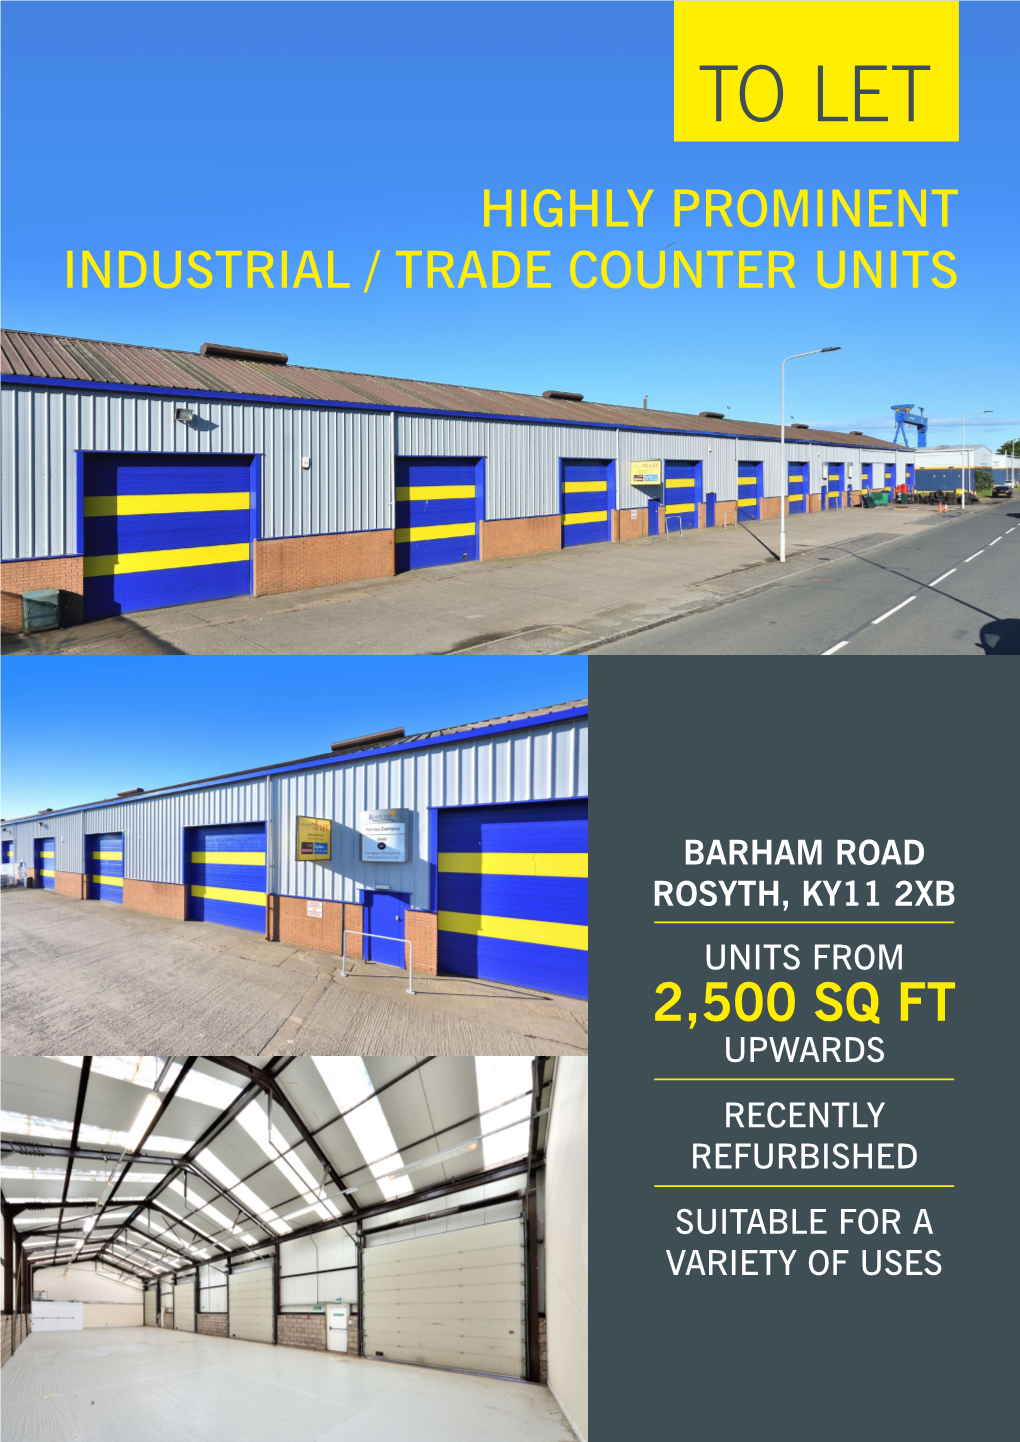 To Let Highly Prominent Industrial / Trade Counter Units